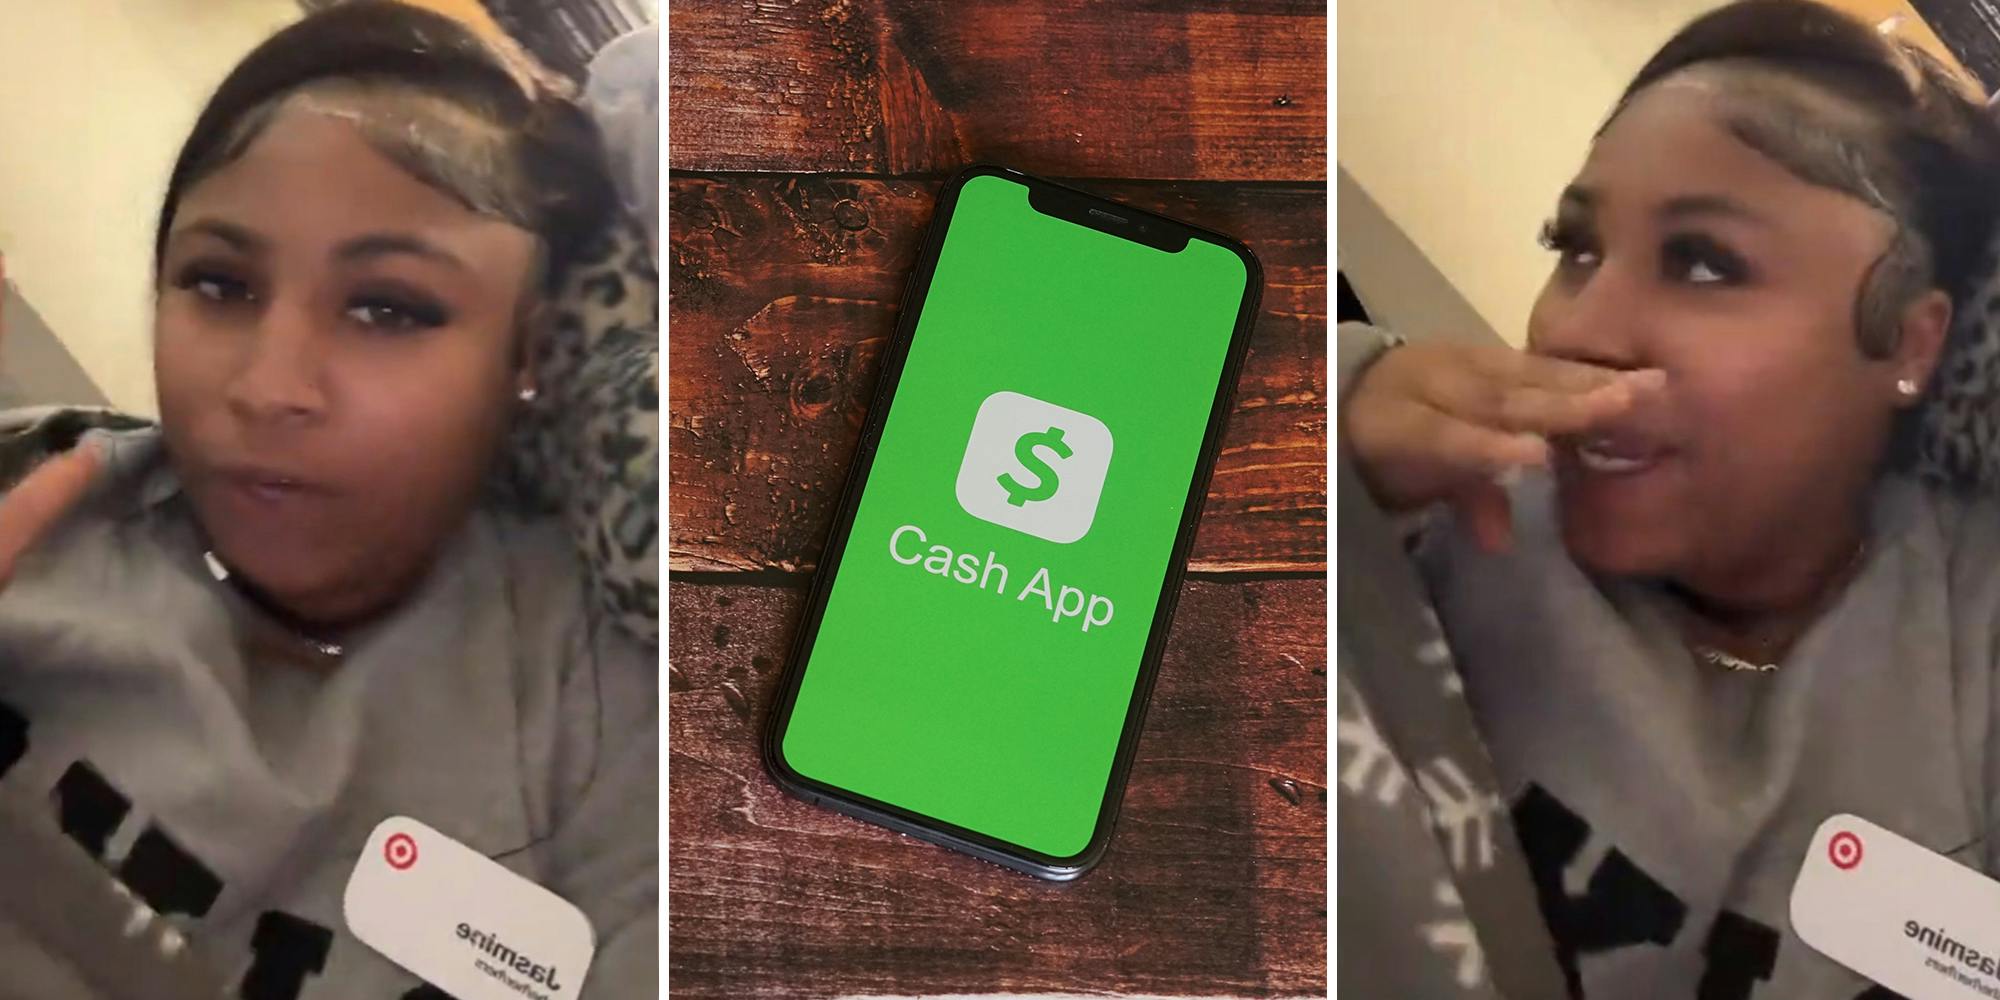 Woman shares trick for increasing borrow limit on CashApp